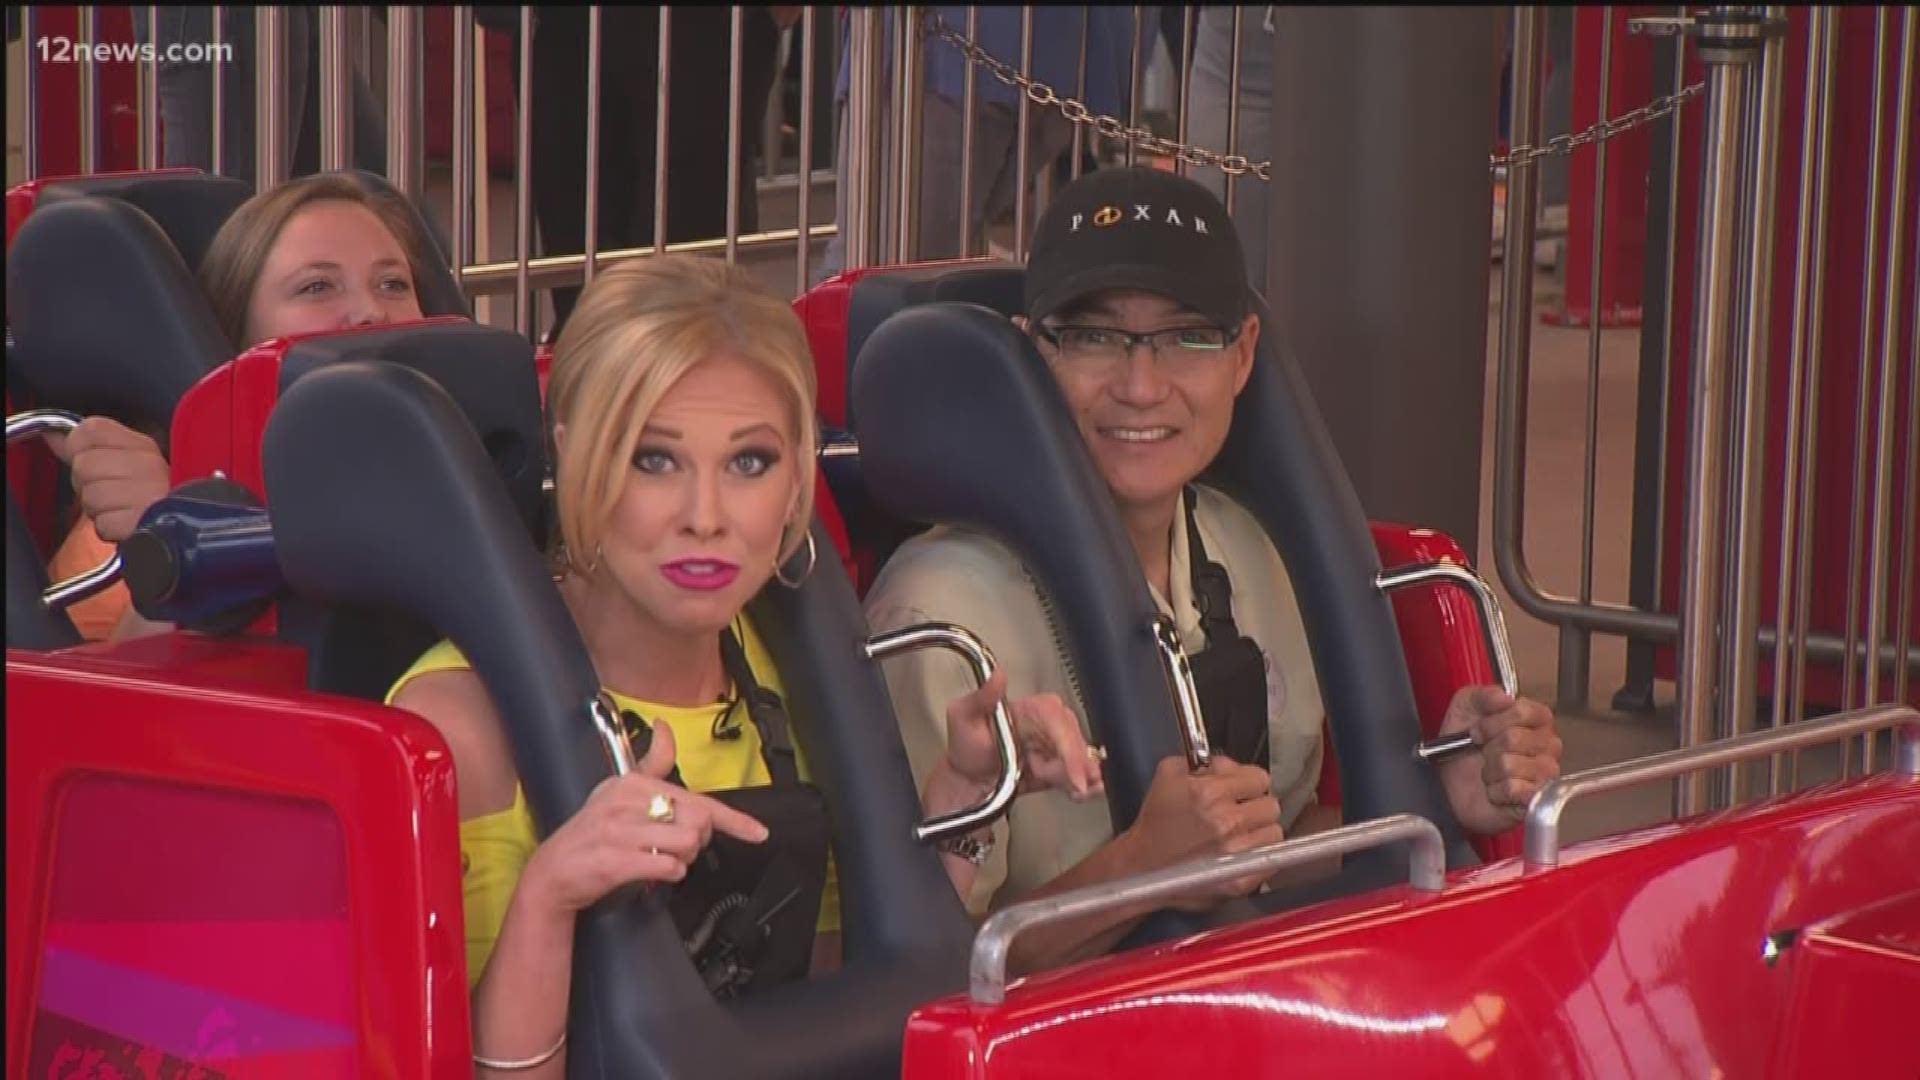 Team 12's Krystle Henderson headed over to California to try out the new roller coaster featuring characters from the "Incredibles" dubbed the "Incredicoaster."